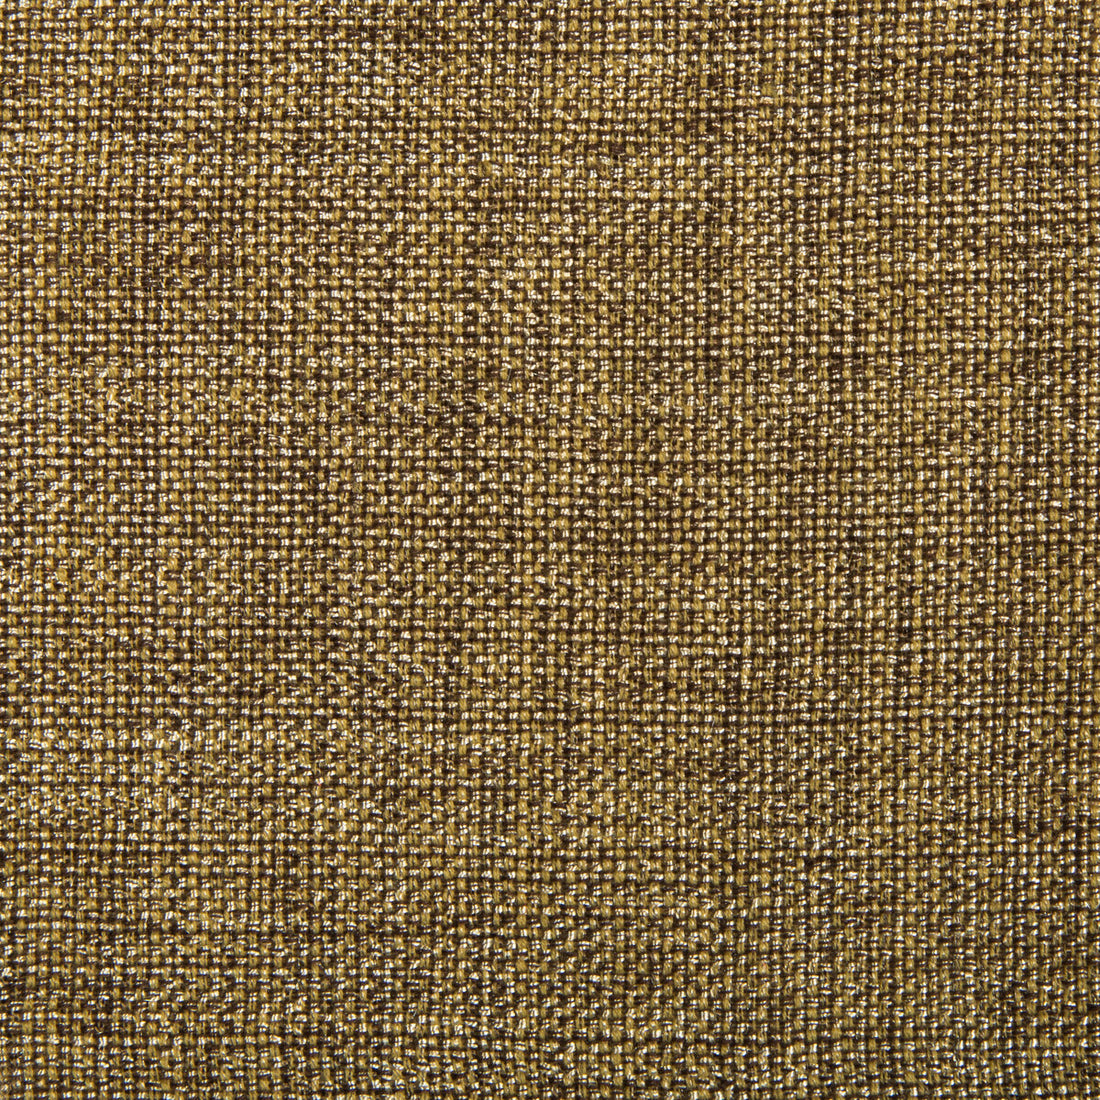 Kravet Contract fabric in 34926-614 color - pattern 34926.614.0 - by Kravet Contract